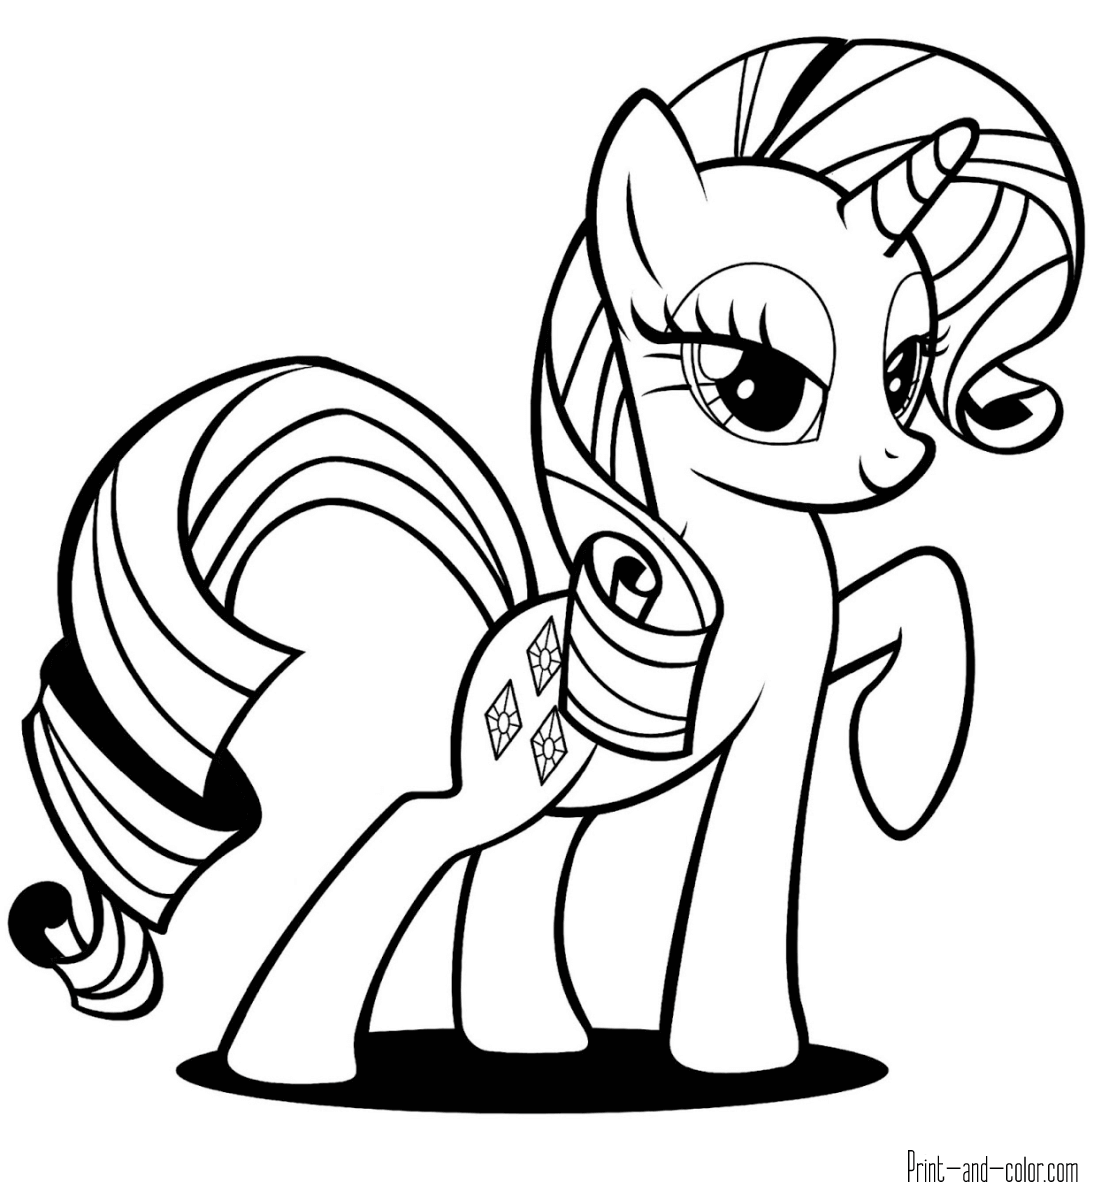 My Little Pony Coloring Pages | Print And Color.com - Coloring Home